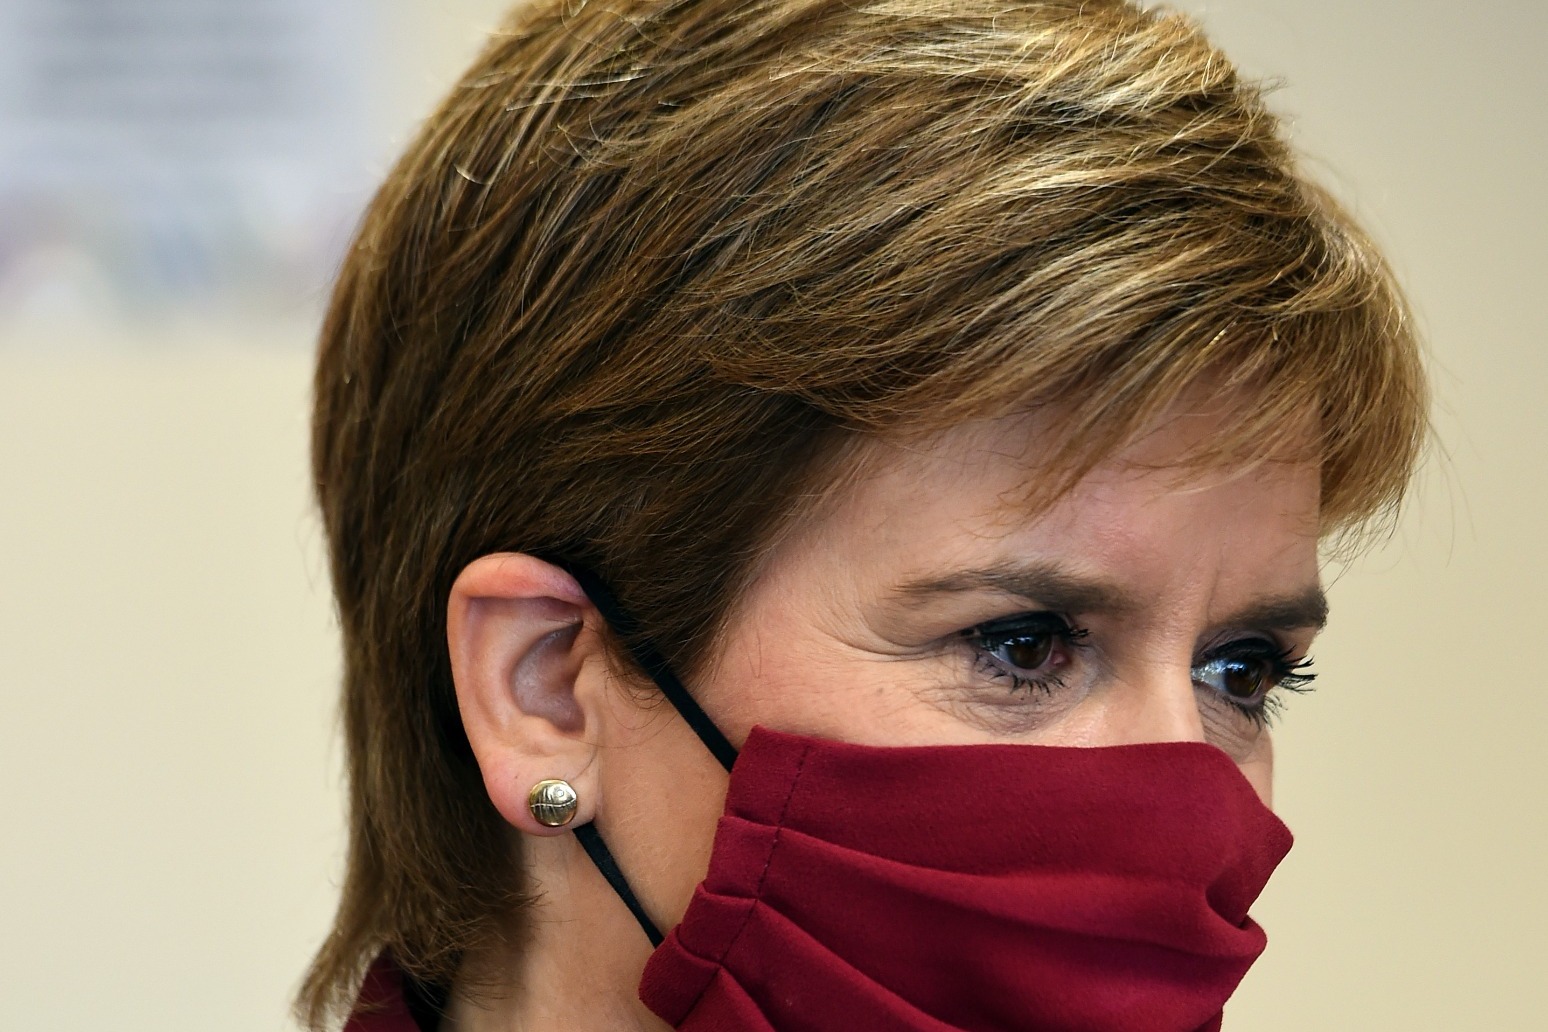 Scotland to end most Covid restrictions but face masks stay in some settings 